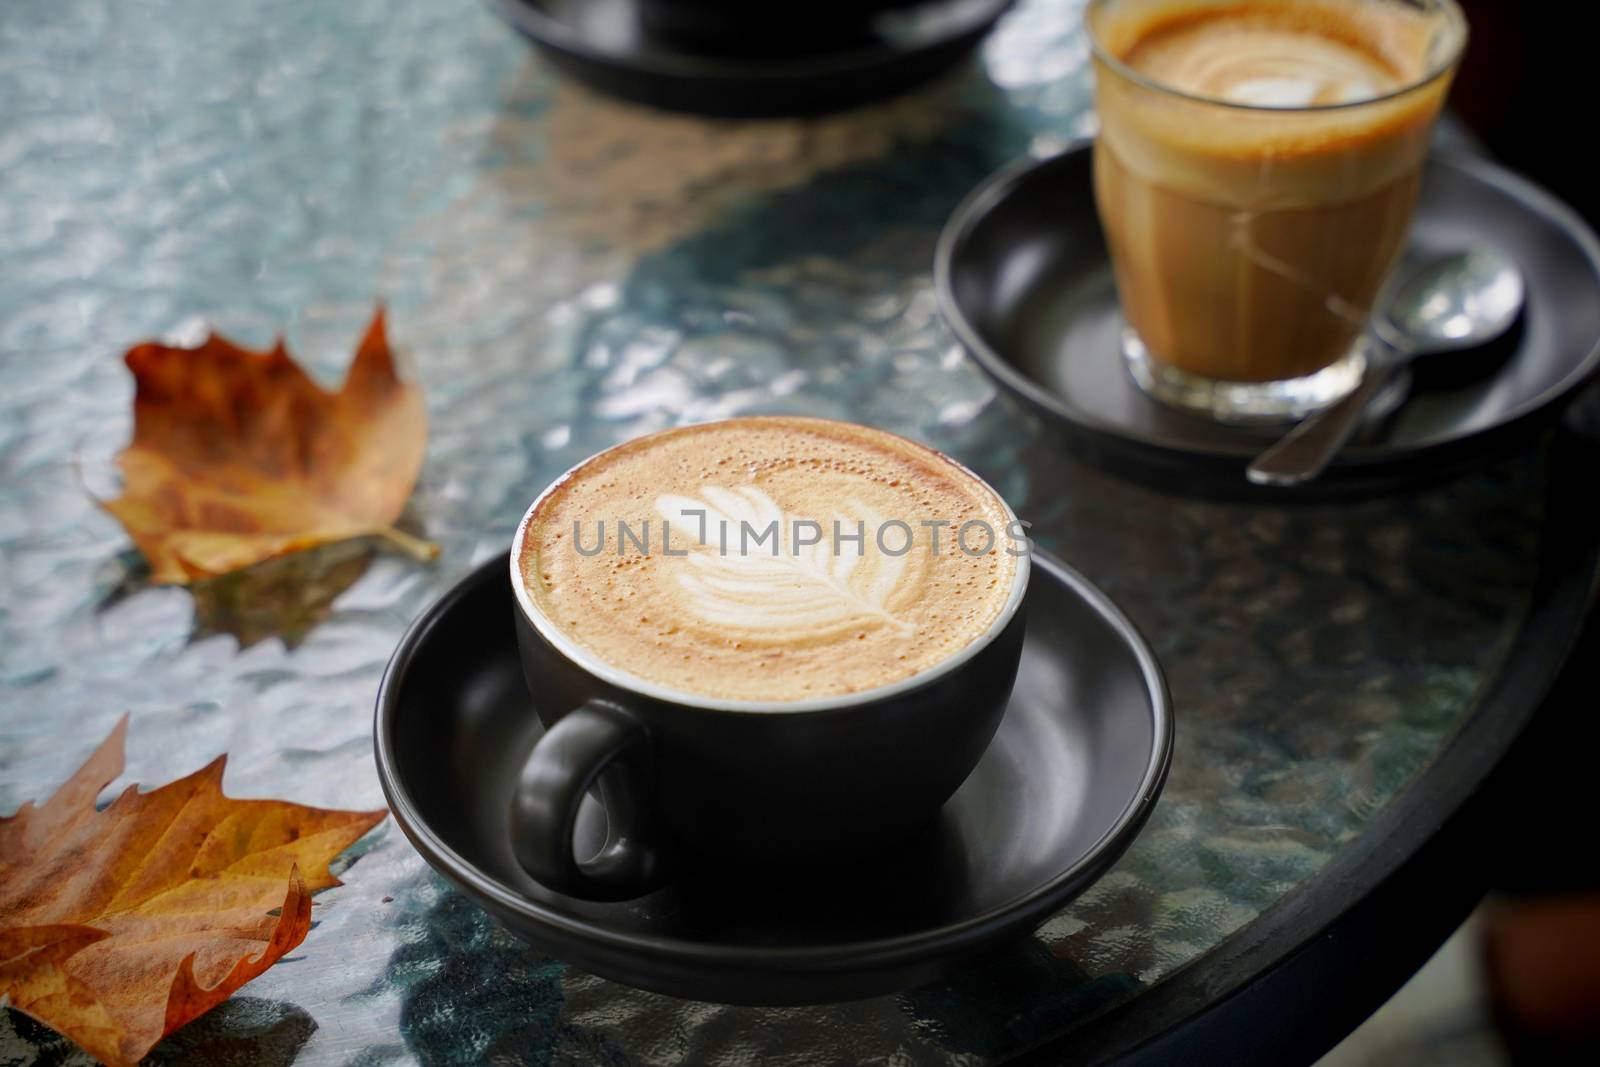 Hot cup of coffee latte and flat white with autumn leaves on the table